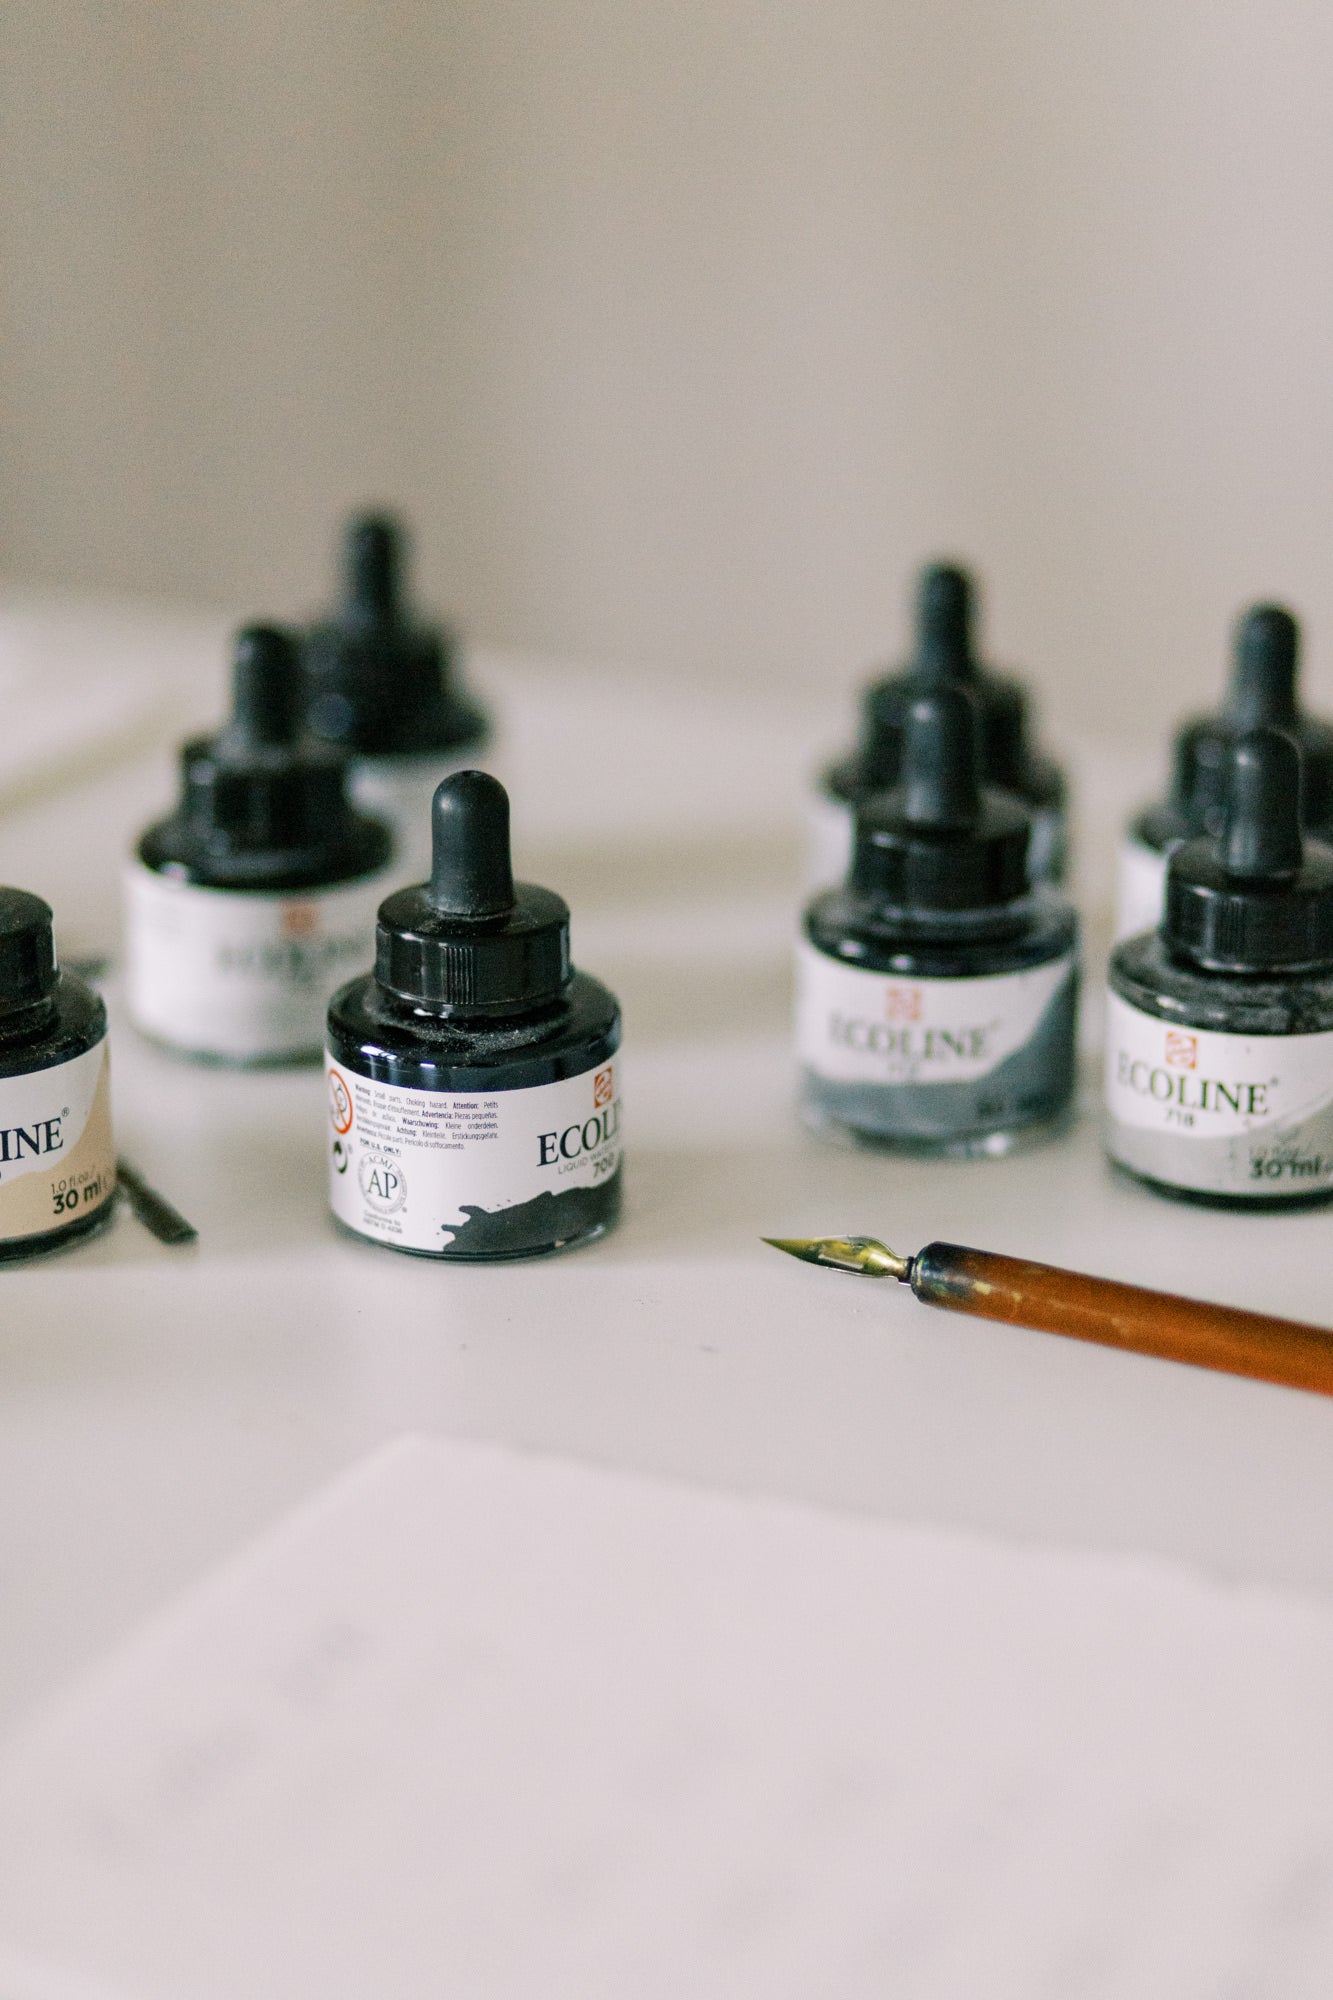   Searching for the perfect choice for creating art on handmade paper? Look no further than TALENS Ecoline Liquid Watercolour inks. These versatile inks are perfect for artists and creatives looking to elevate their artwork on handmade paper.